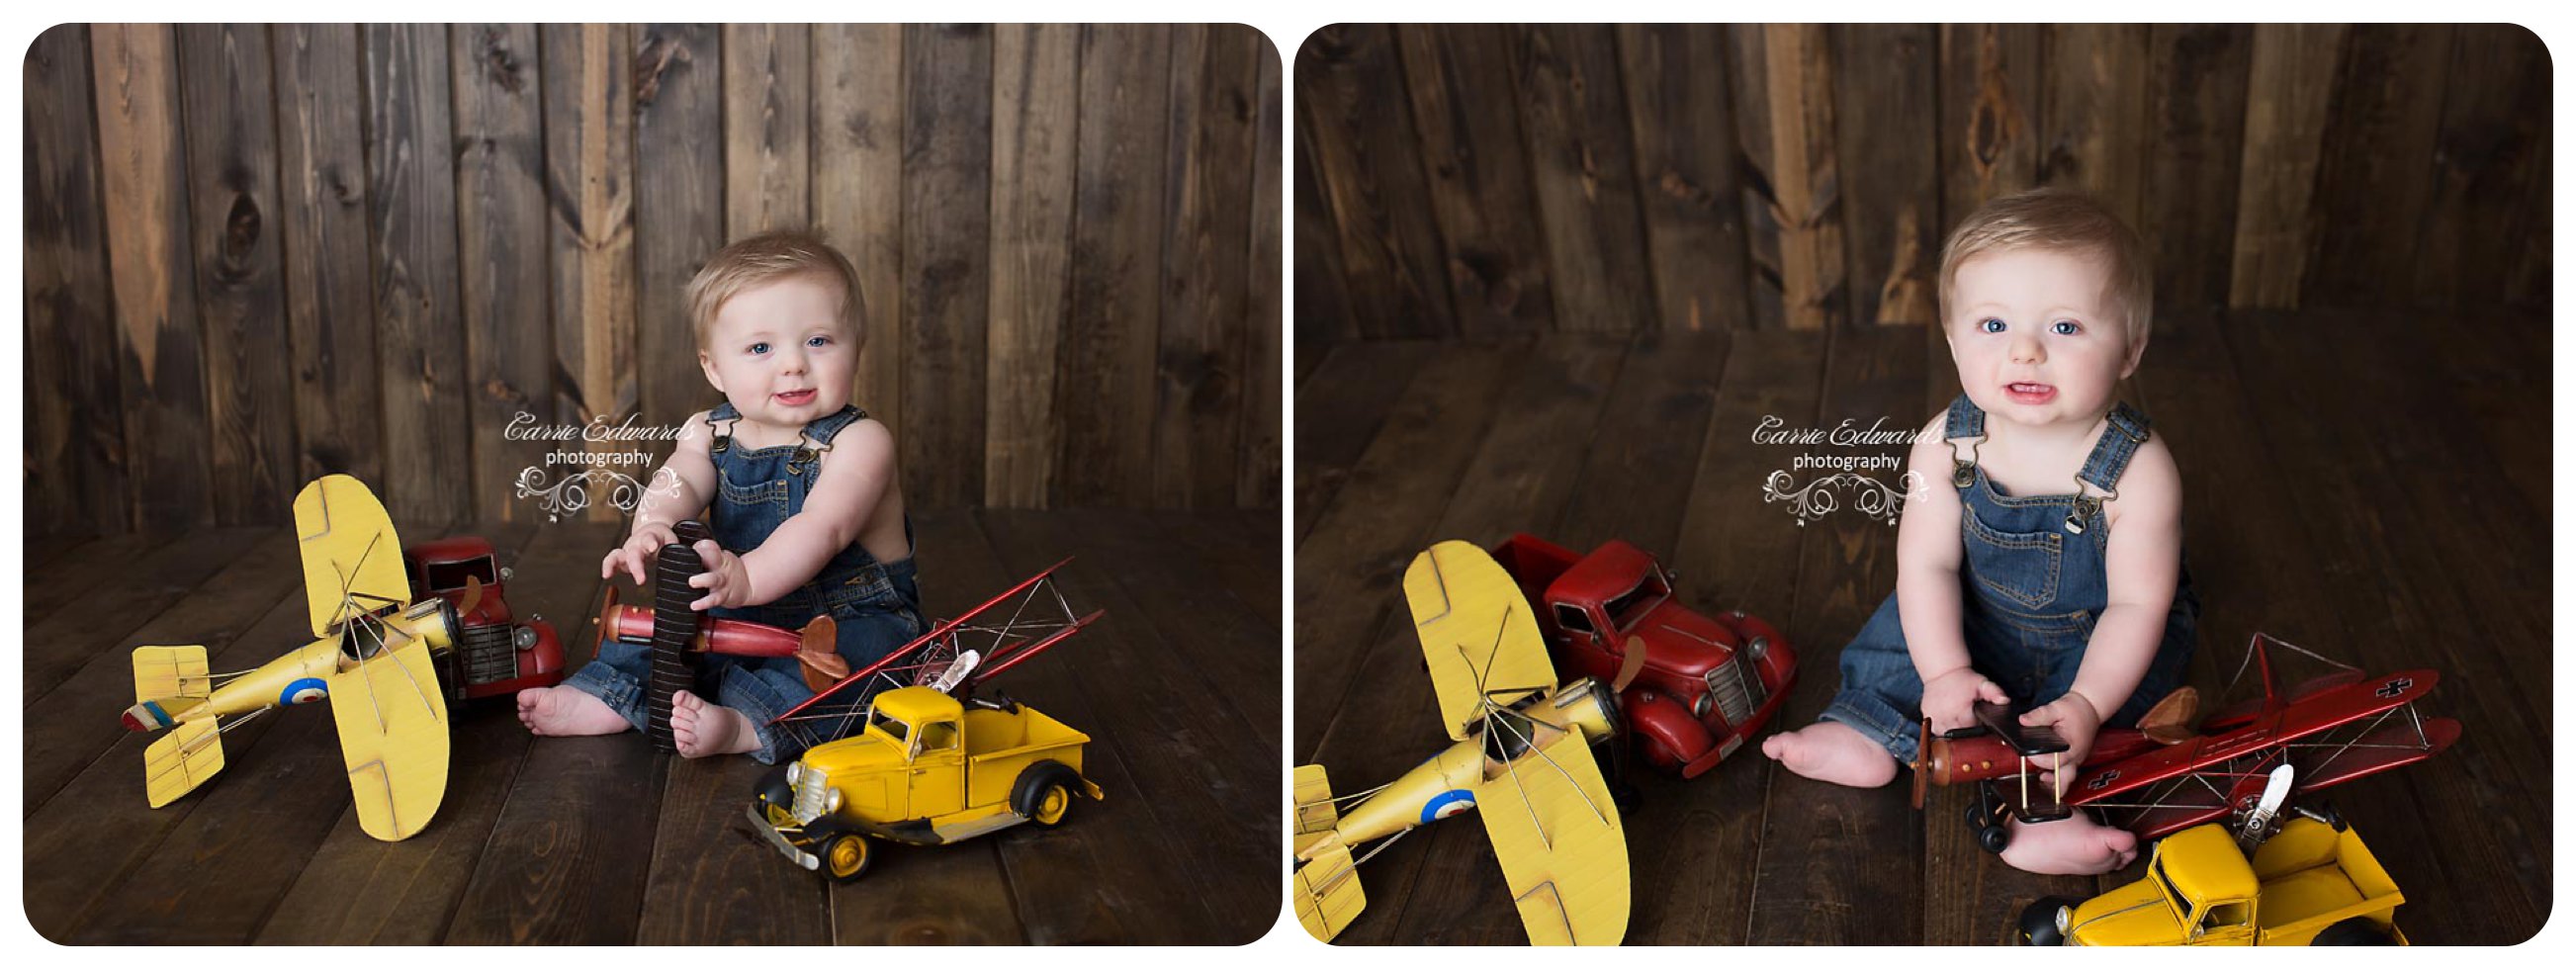 Evergreen Newborn Photographer, Toddler Session, 6 Month Session, Milestone Session, Baby Boy, Cute Baby Boy, Carrie Edwards Photography, Baby with overhauls, Baby with airplanes, airplane theme